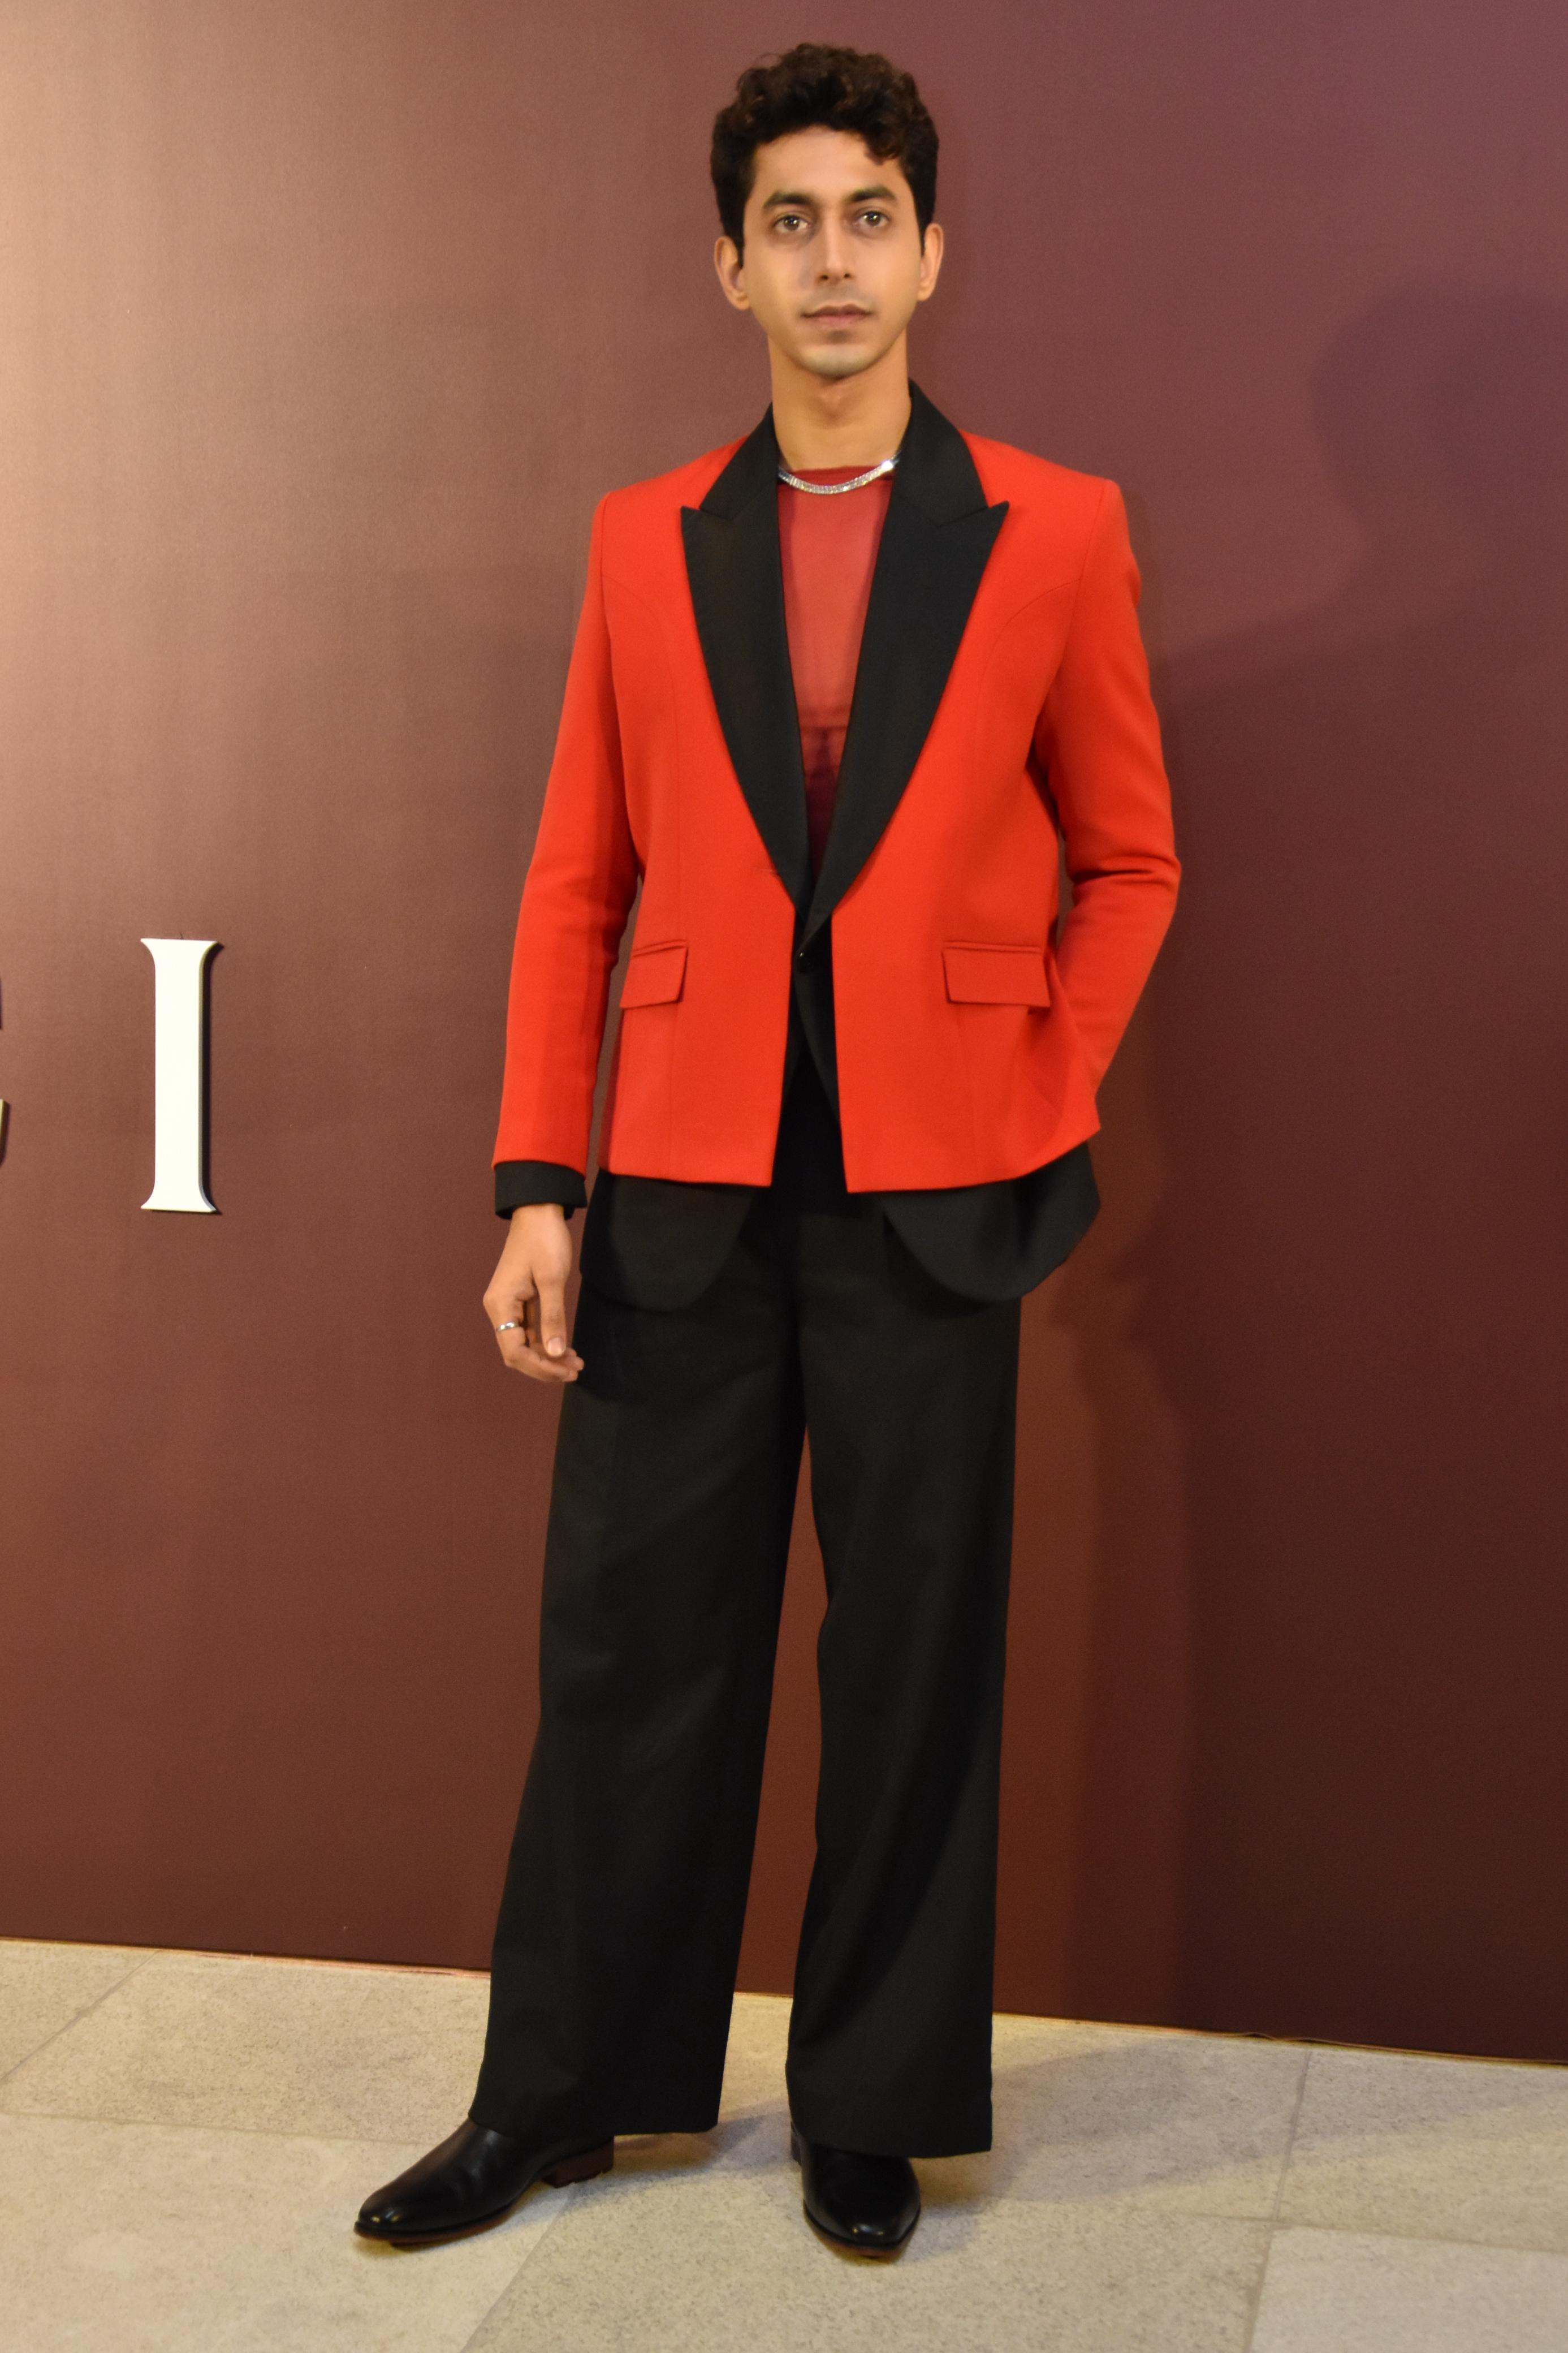 Mihir Ahuja graced the event in a stylish red blazer, which he paired with black pants. The exciting golden chain enhanced the actor's overall appearance